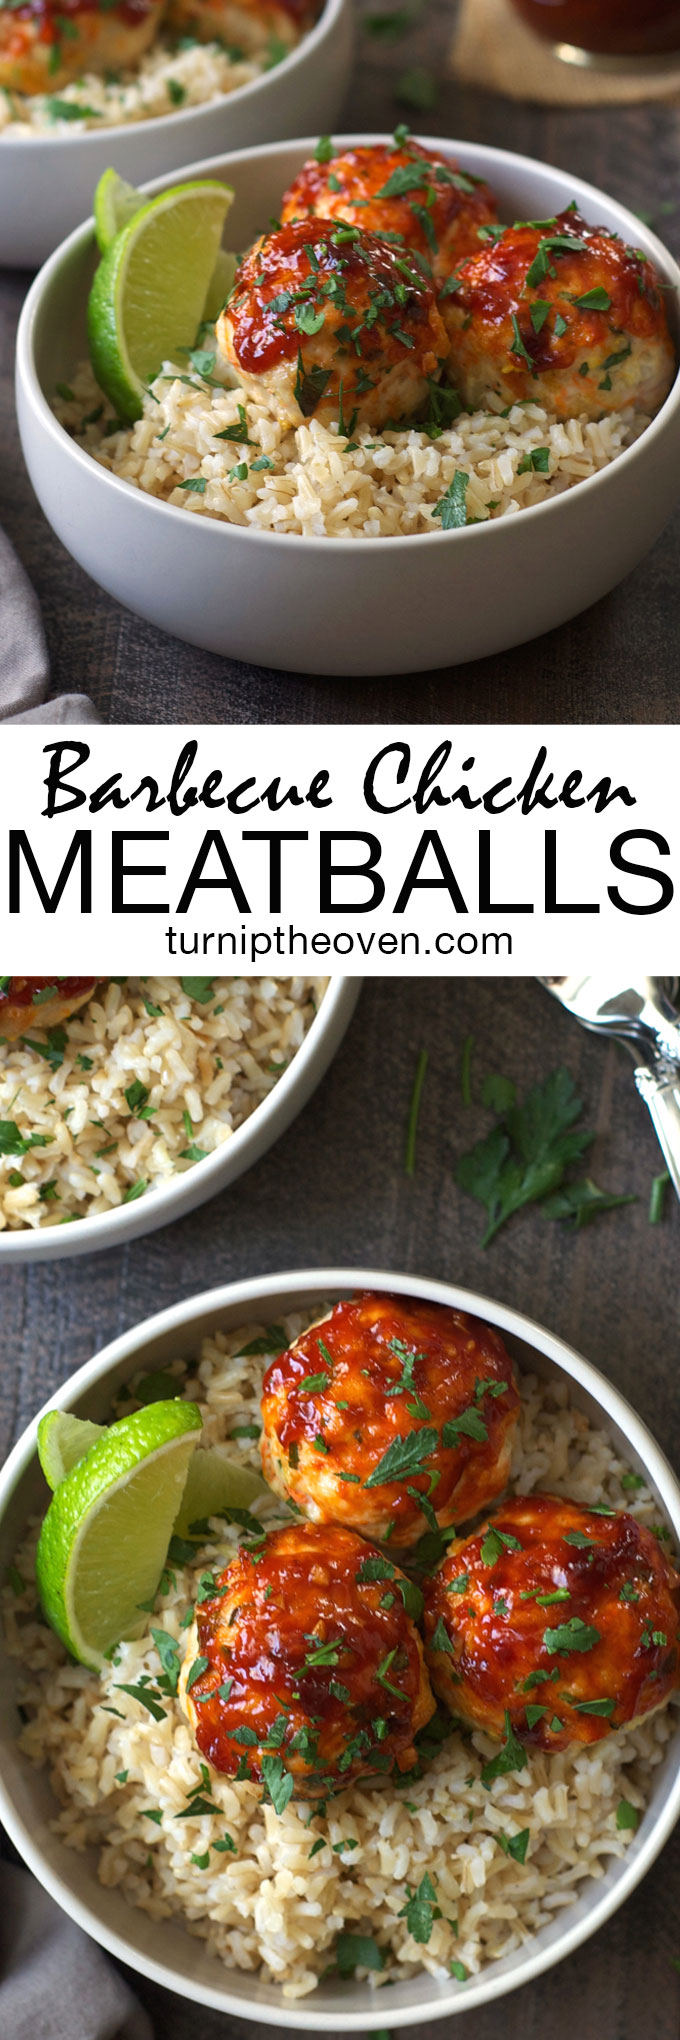 Bring the saucy, spicy-sweet flavor of barbecue chicken indoors with these easy, oven-baked barbecue chicken meatballs! Light, healthy, and kid-friendly, they are perfect for those nights when you just can't deal with the grill.